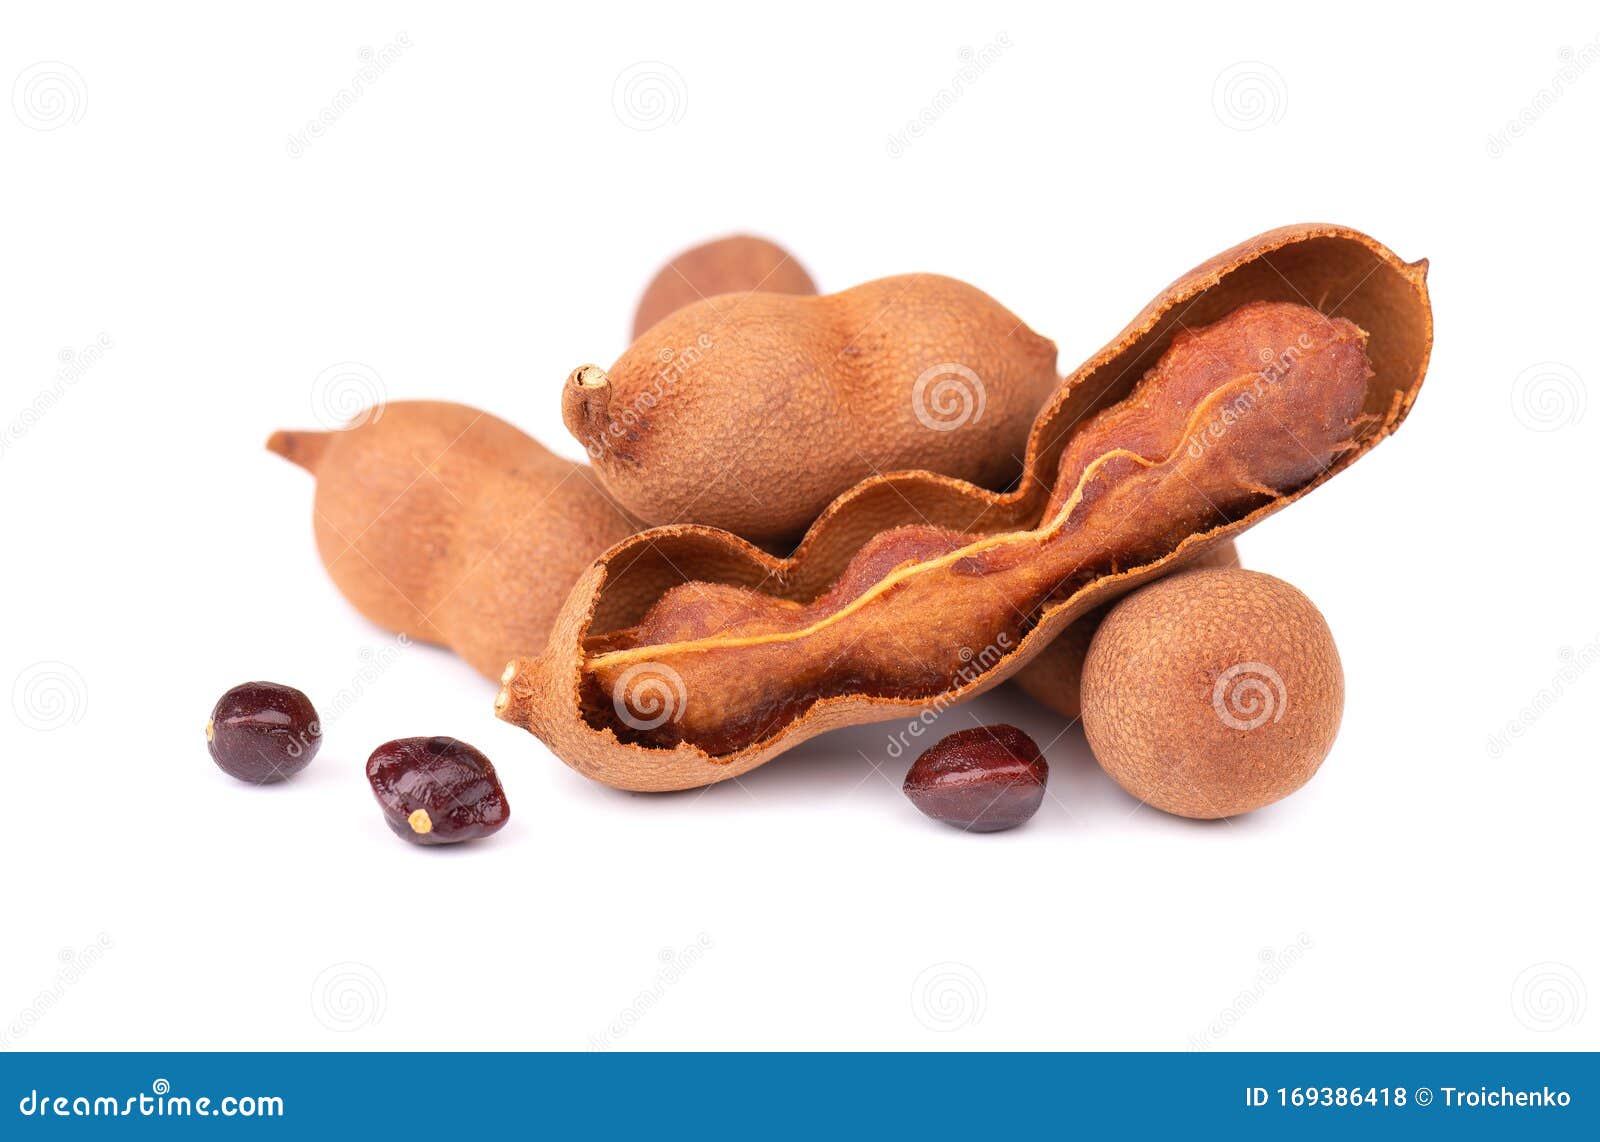 Sweet Tamarind Isolated On White Background Fresh Tamarind Fruit And Seeds Stock Photo Image Of Dieting Gourmet